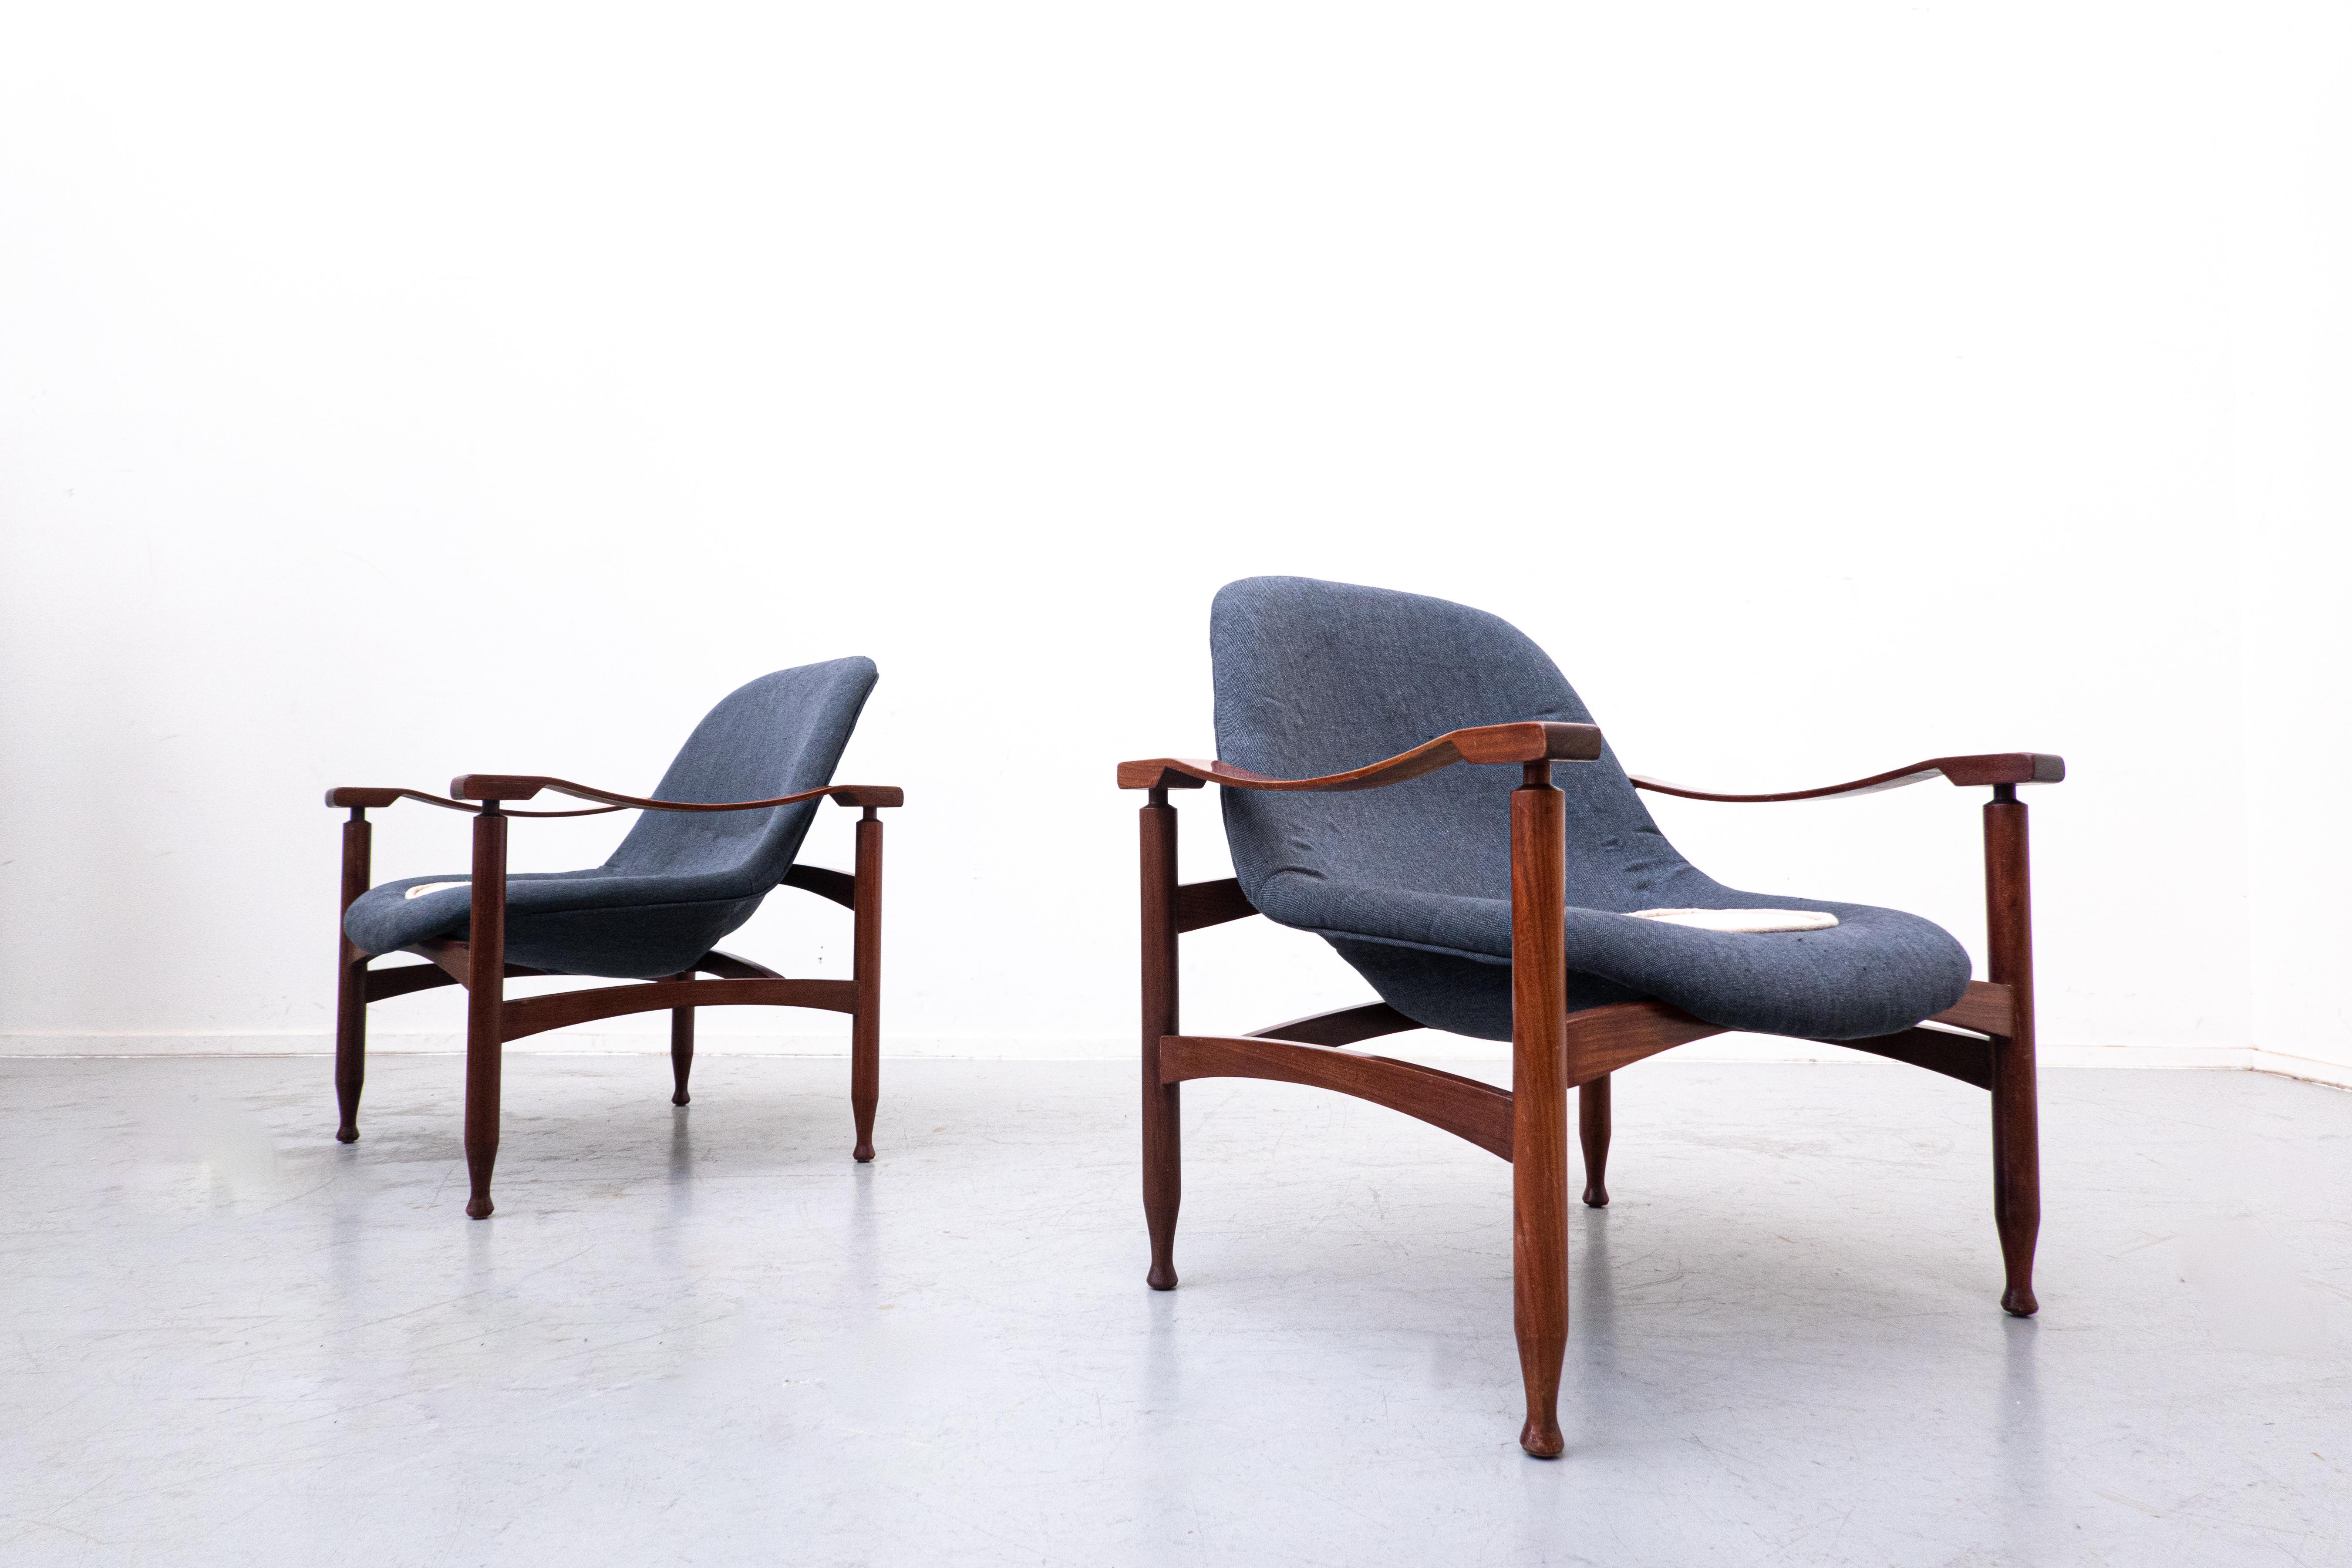 Pair of blue armchairs by Jorge Zalszupin, Wood and Fabric, Brasil, 1960s.